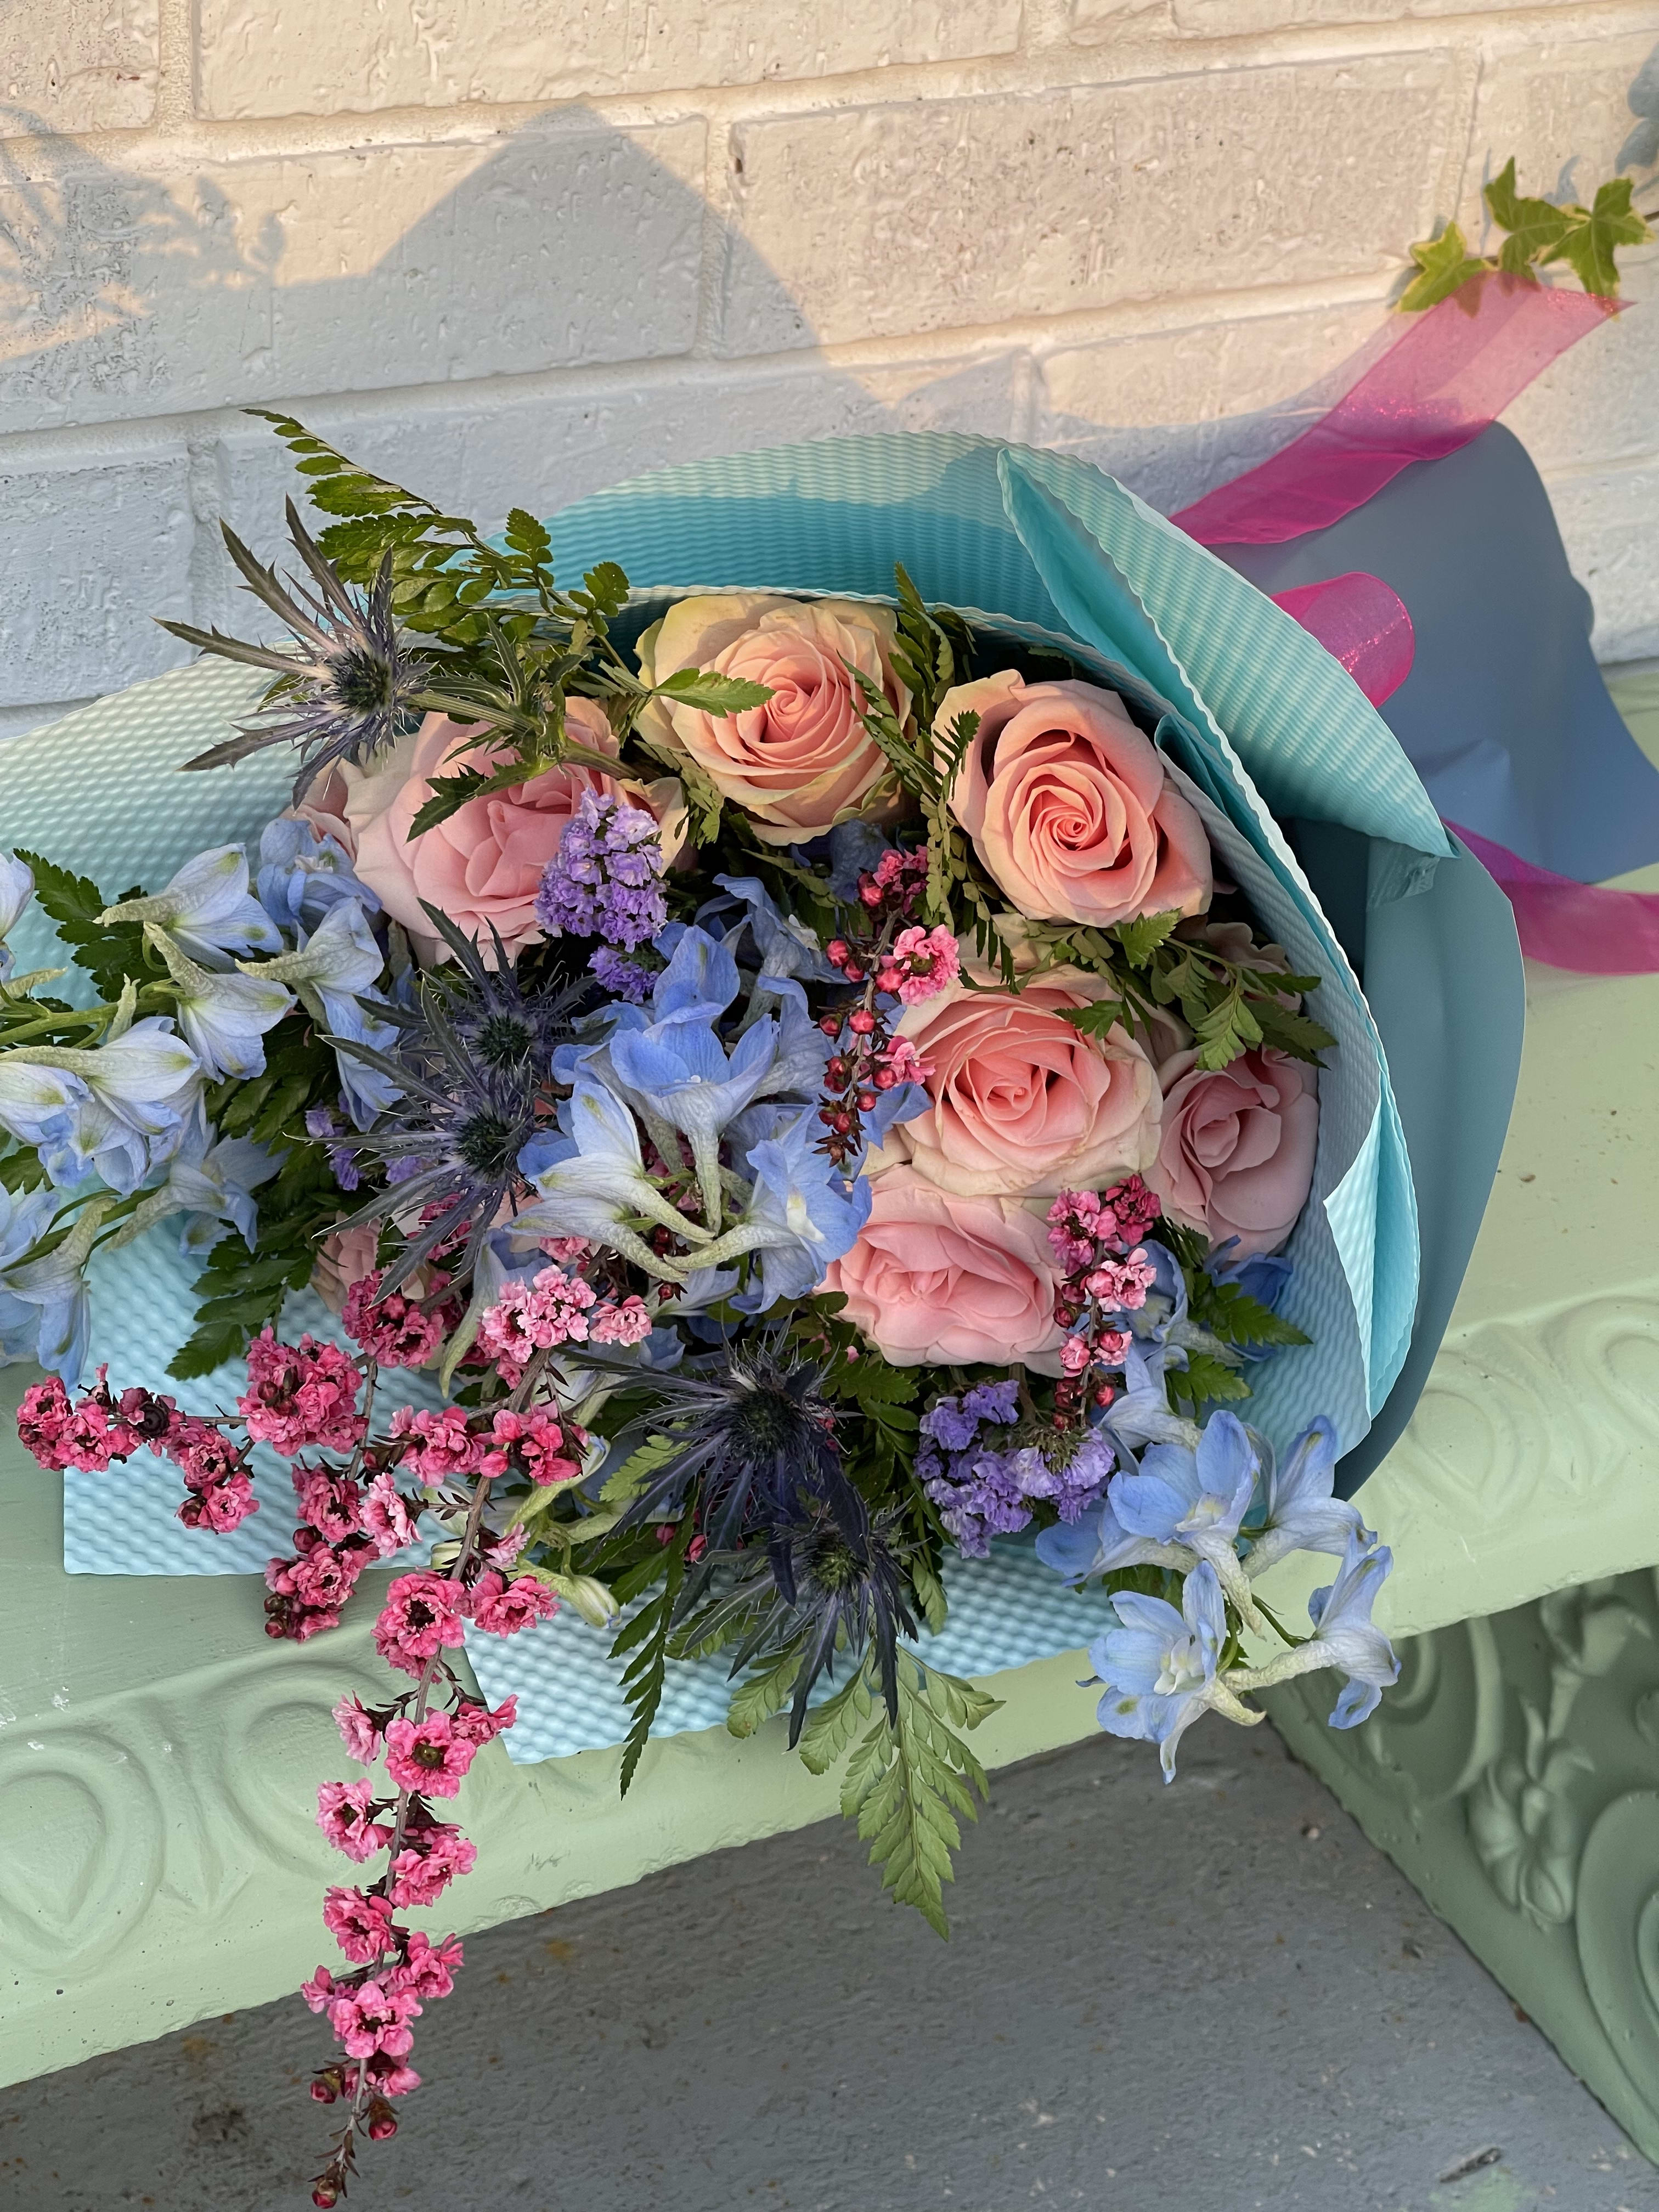 The Pastel Color Luxury Mixed Bouquet